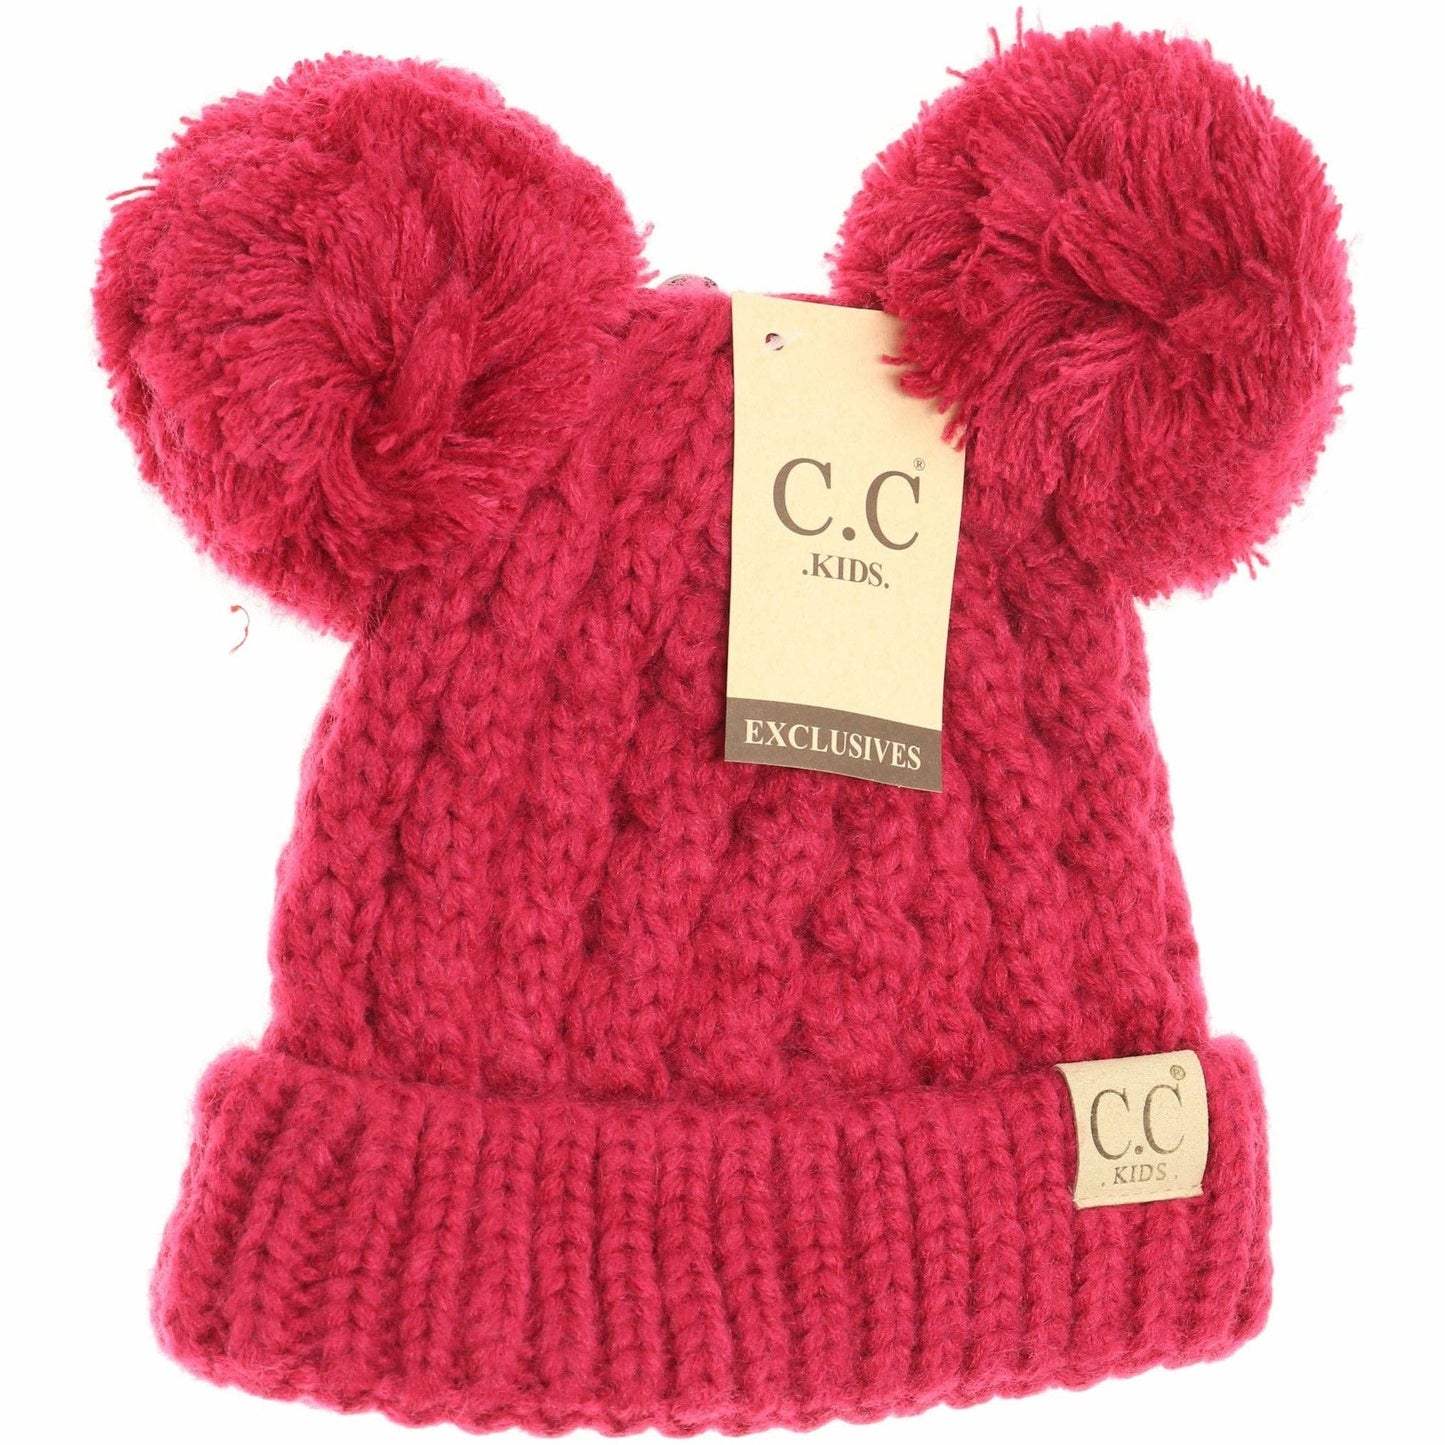 Kids Solid Double Pom CC Beanies KIDS24: New Candy Pink